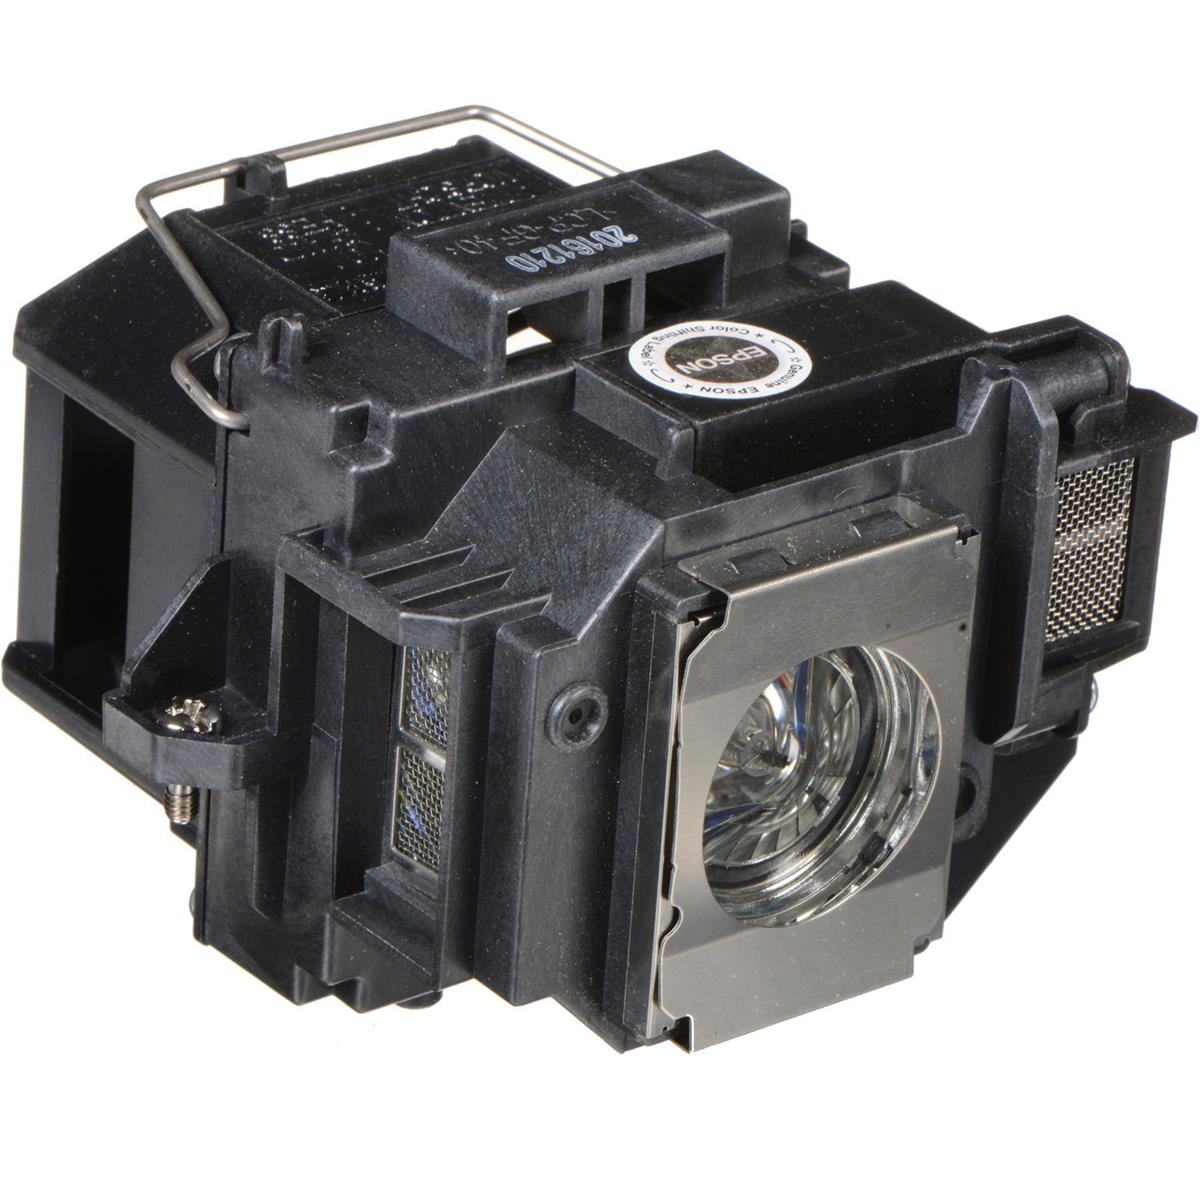 Image of Epson ELPLP56 Lamp for Epson MovieMate 60/62